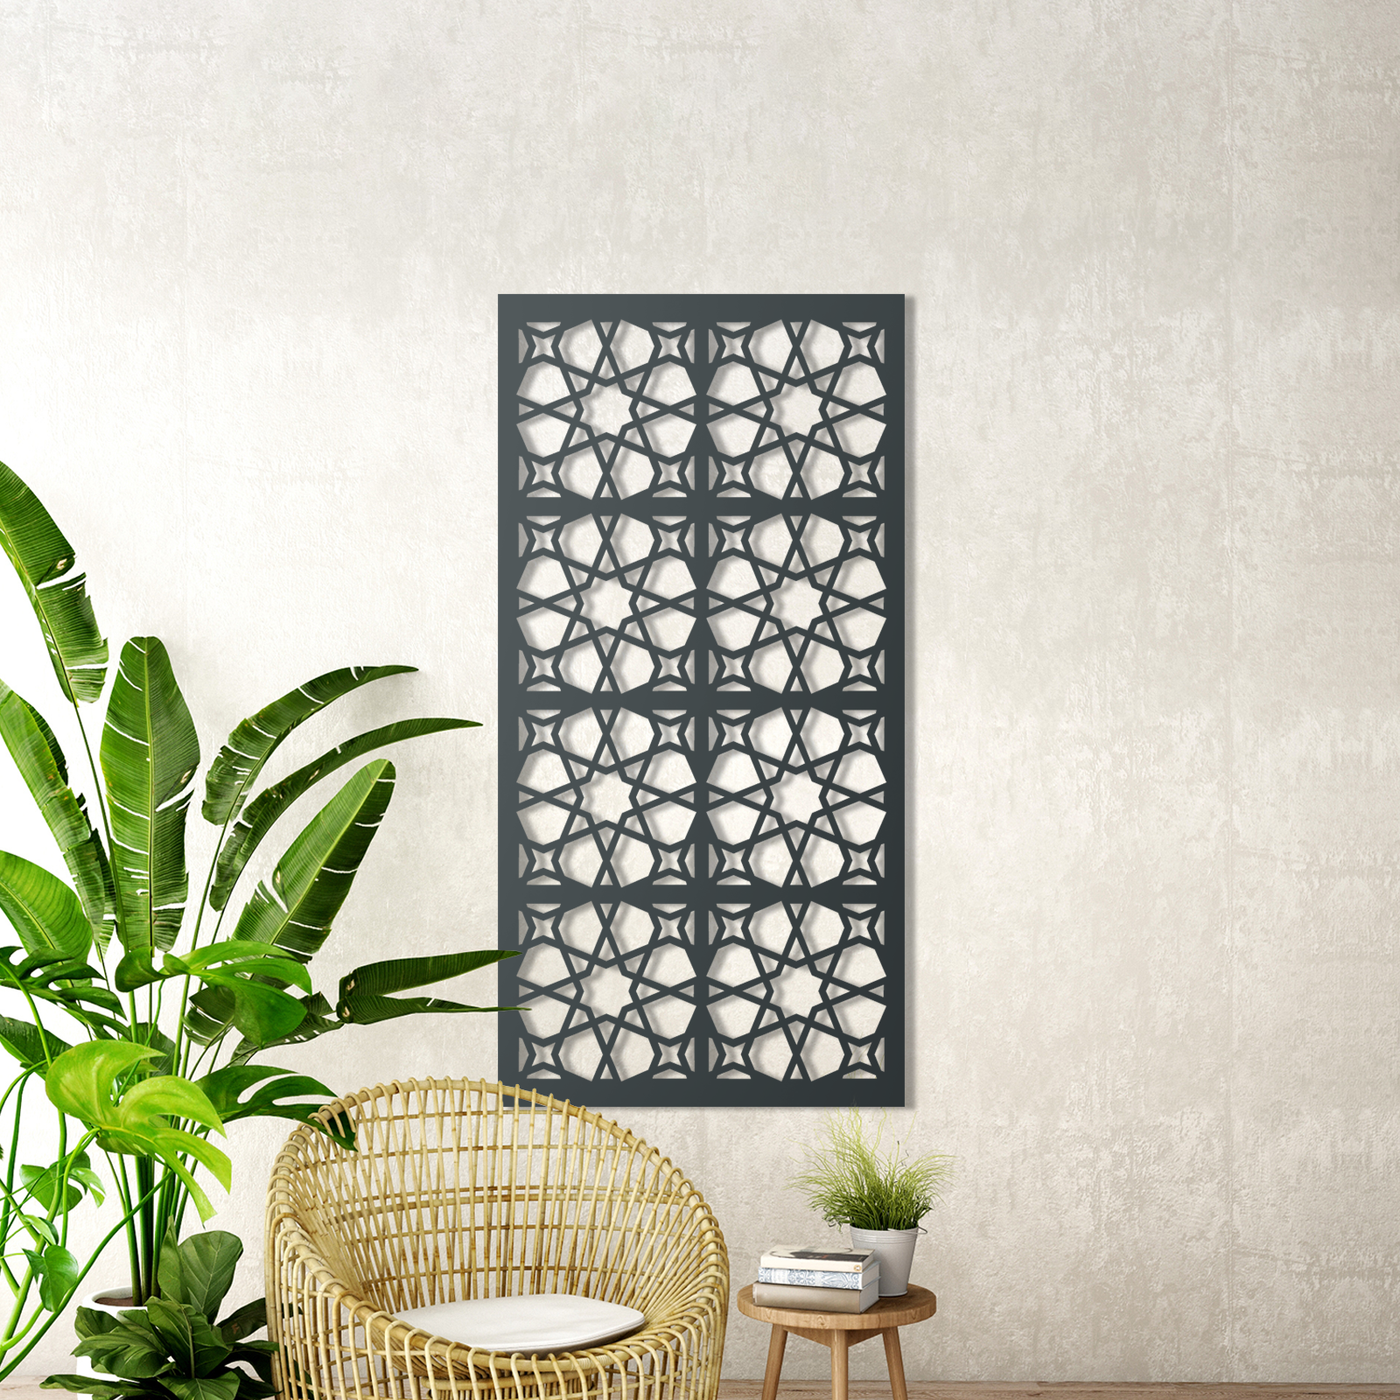 Hubun Garden Screen: The Perfect Way to Add Privacy to Your Outdoor Space